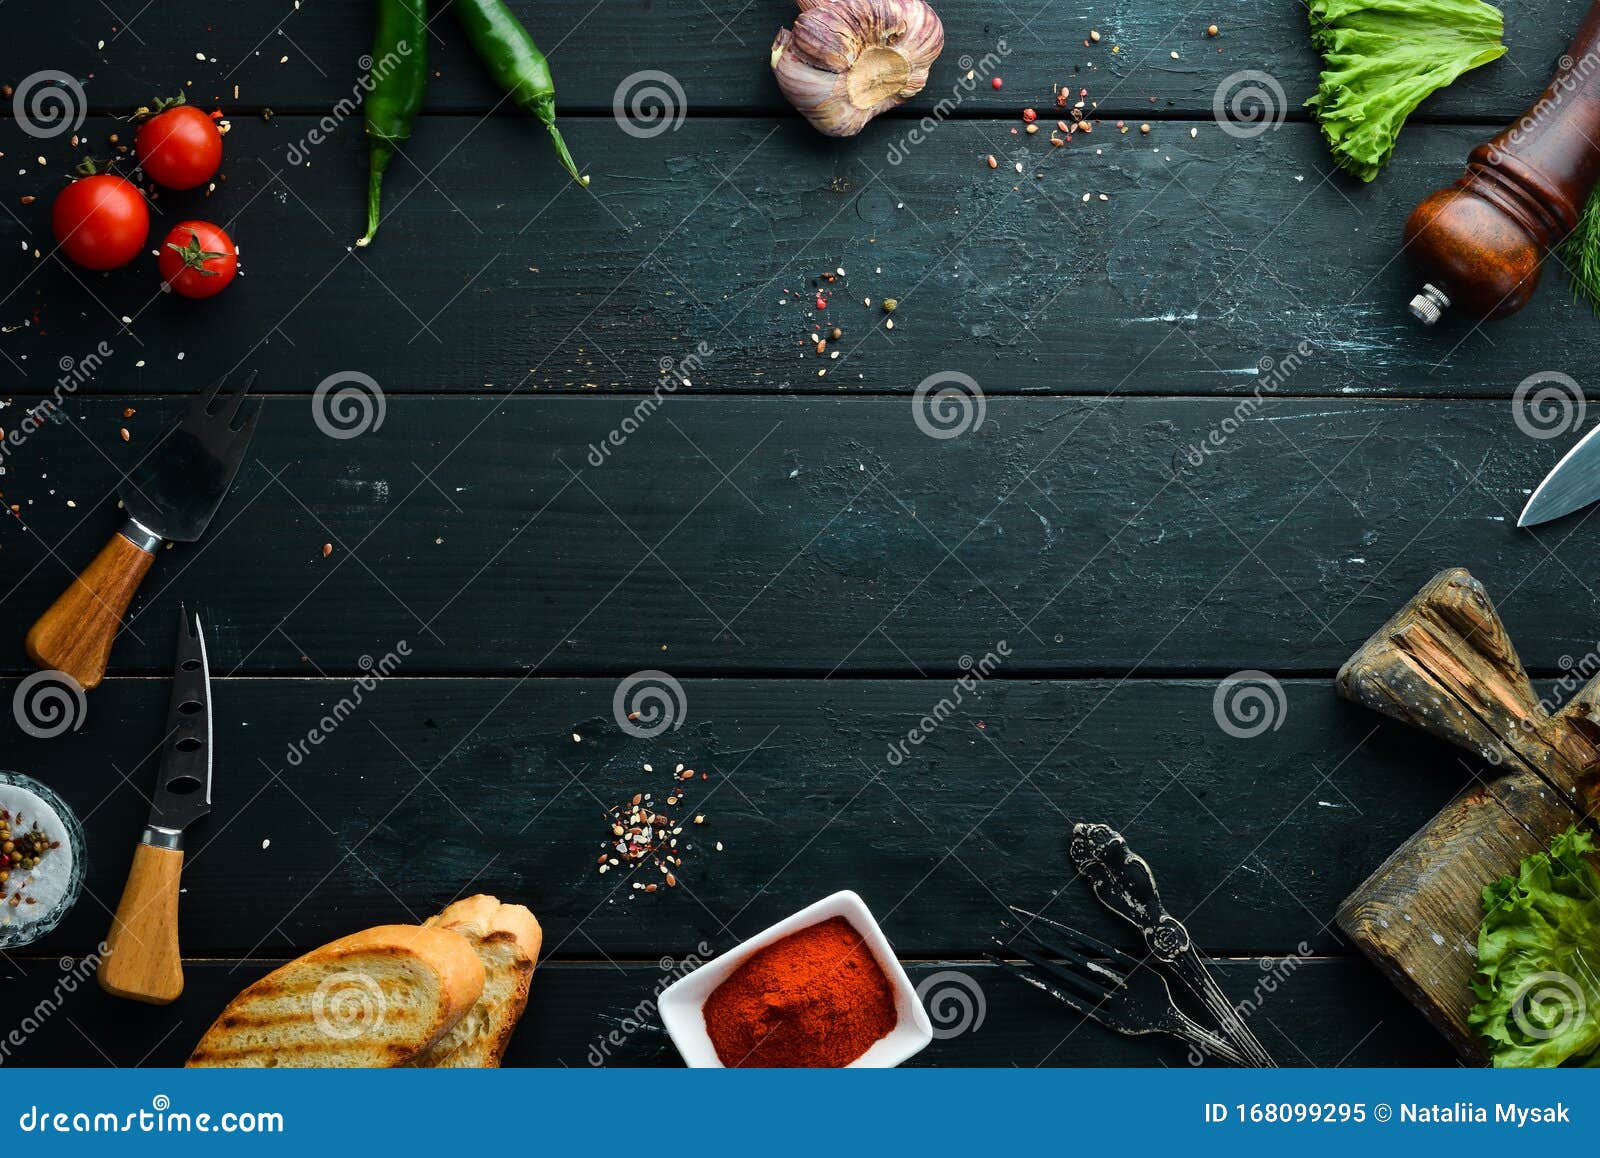 Black cooking background. stock image. Image of diet - 168099295